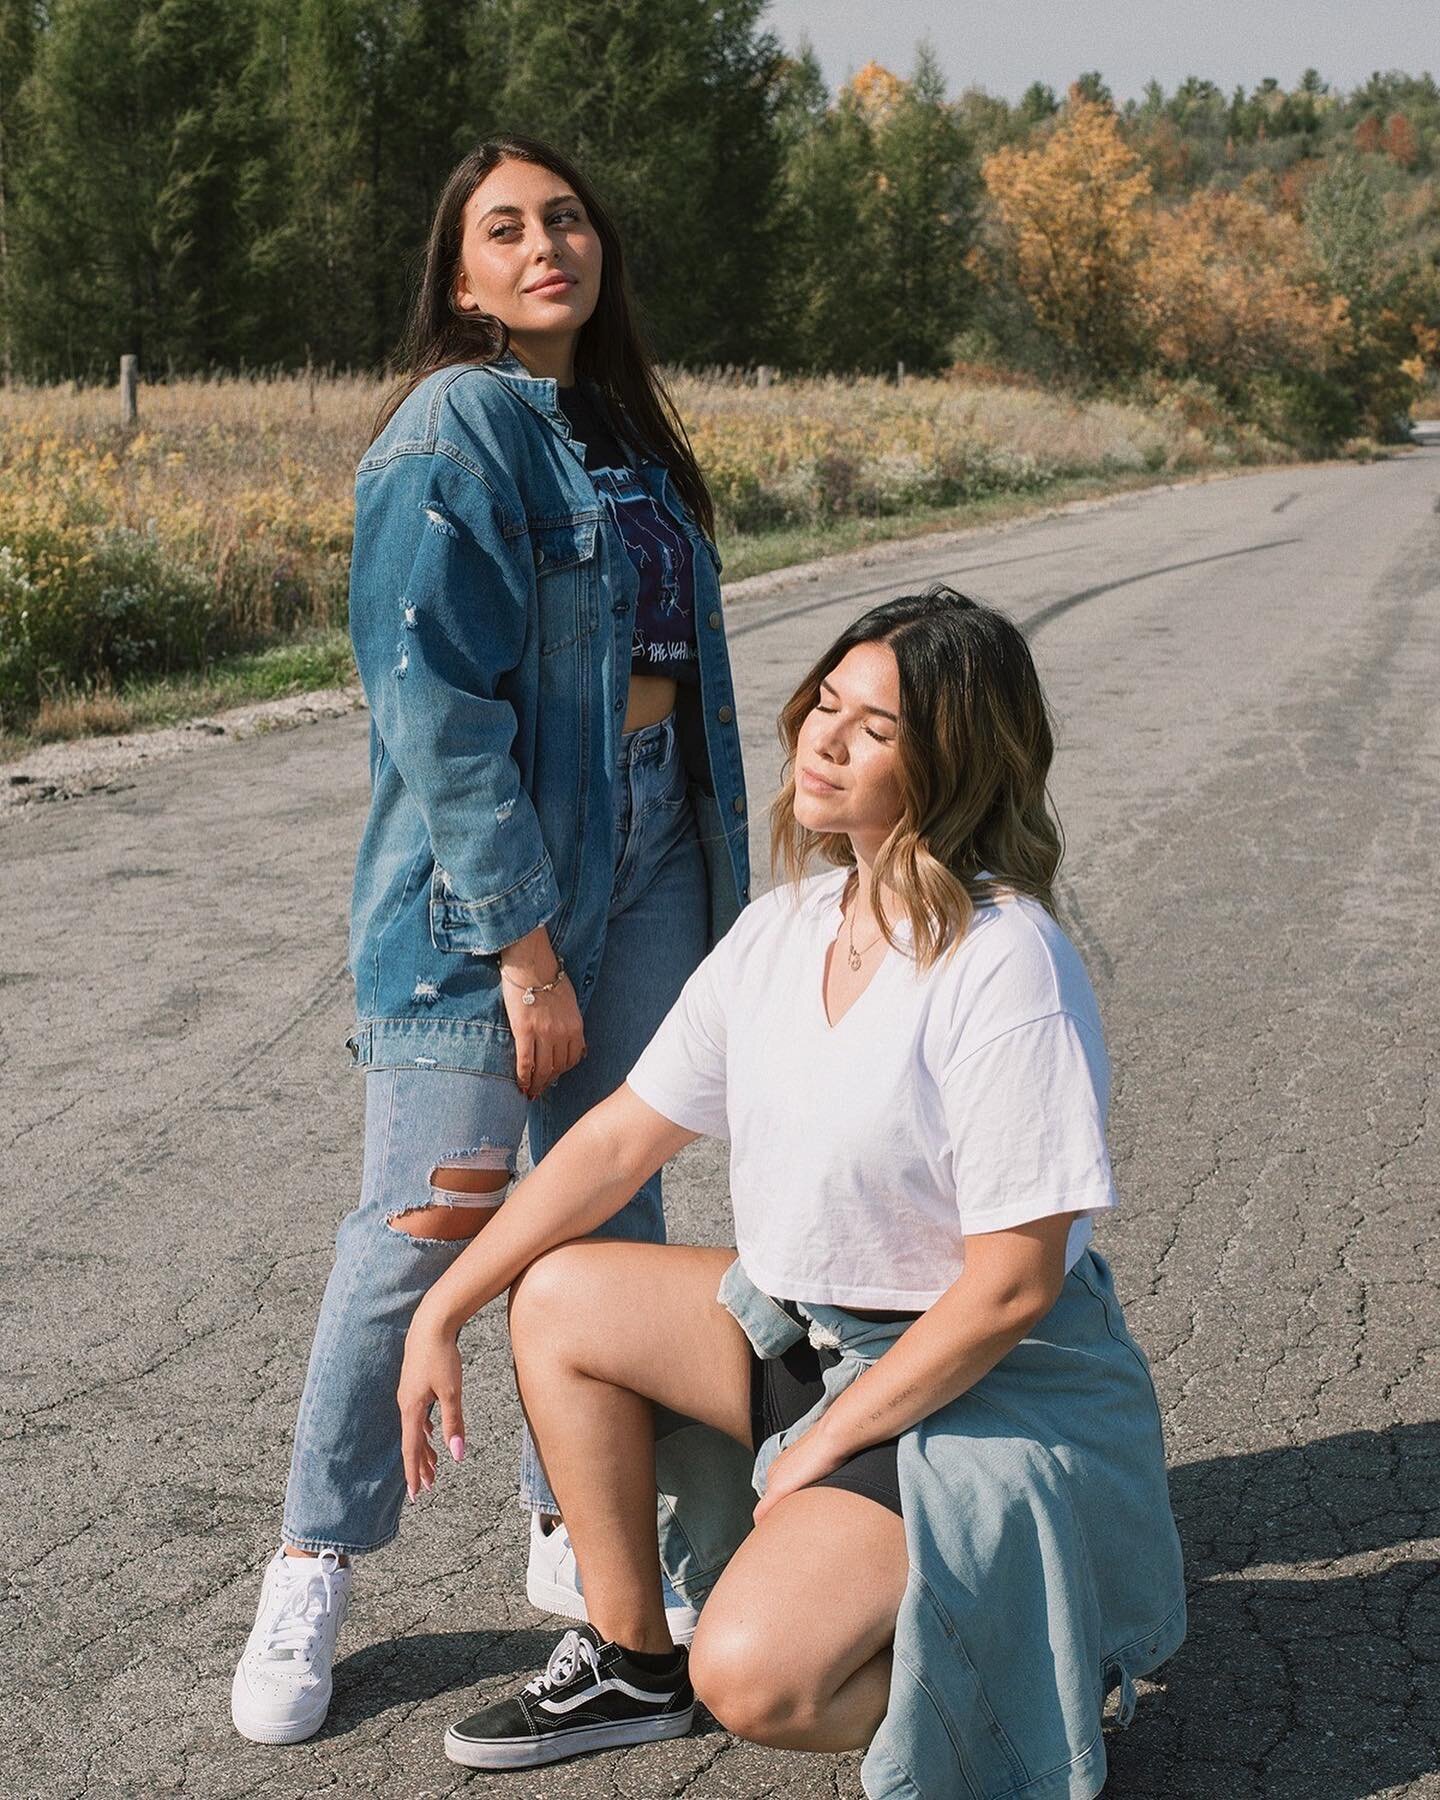 I can always count on my gals to be the BEST models🤩
.
.
.
.
.

#torontophotographer #torontophotography #toronto #fallphotography #fallphotoshoot #fall #fallseason #fallfashion #fashionphotography #gtaphotographer #photography #photographer